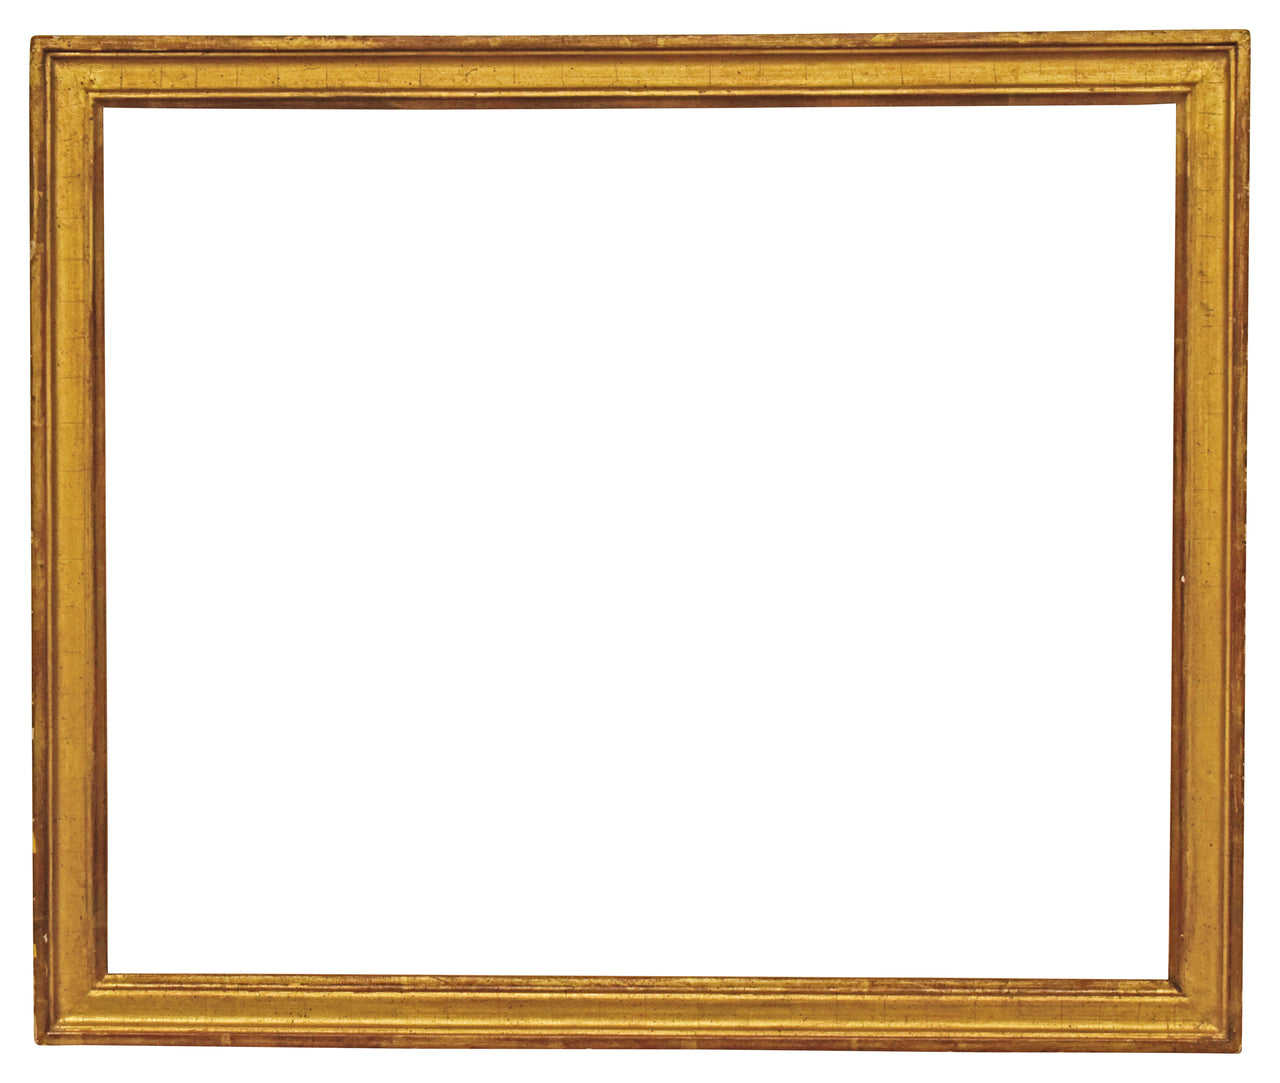 16x19 inch Antique American Gold Picture Frame For Canvas Art circa 1900s (20th Century).